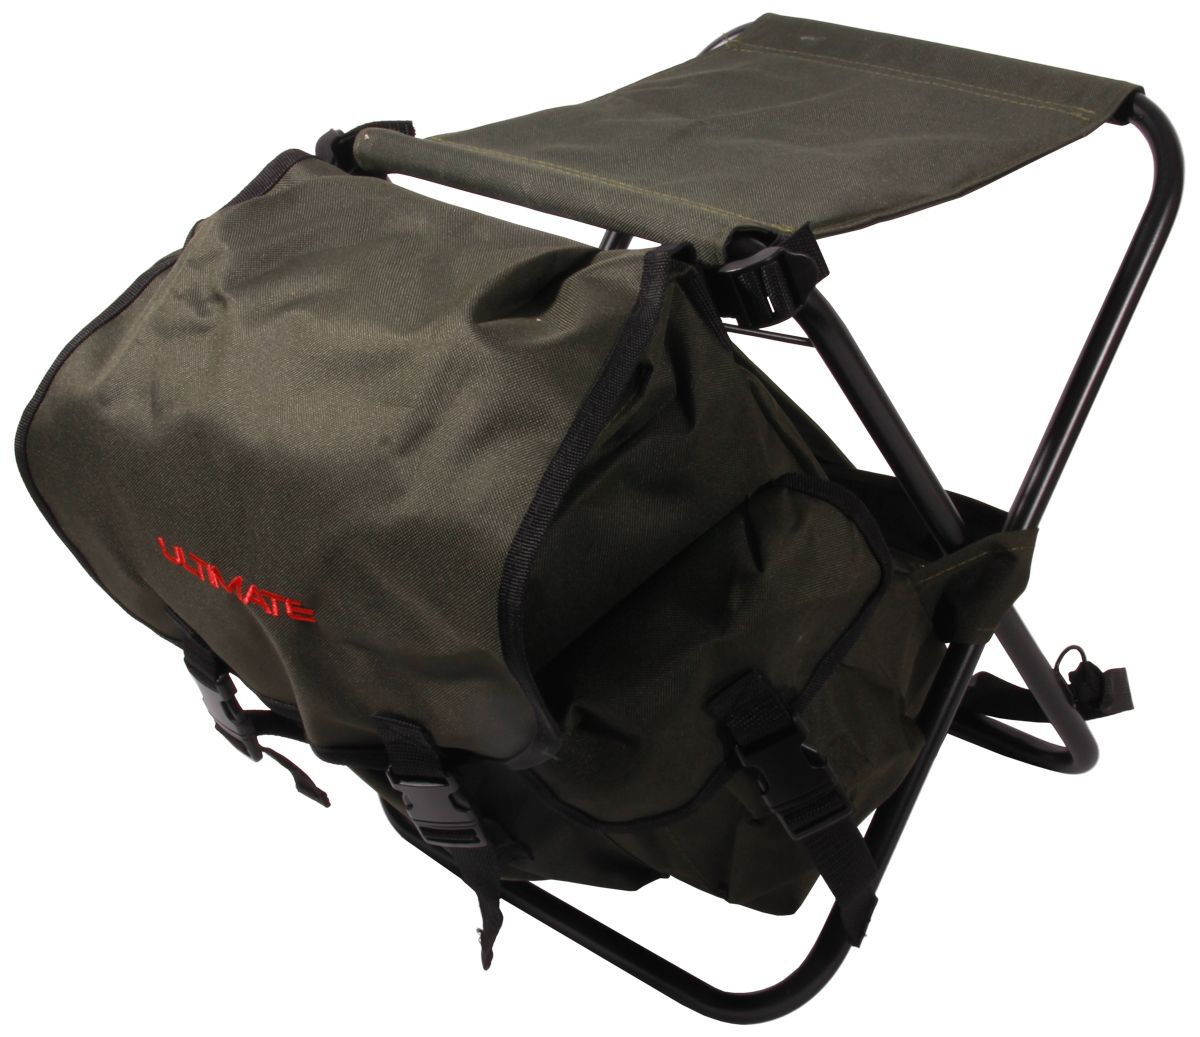 Folding Stool with Backpack